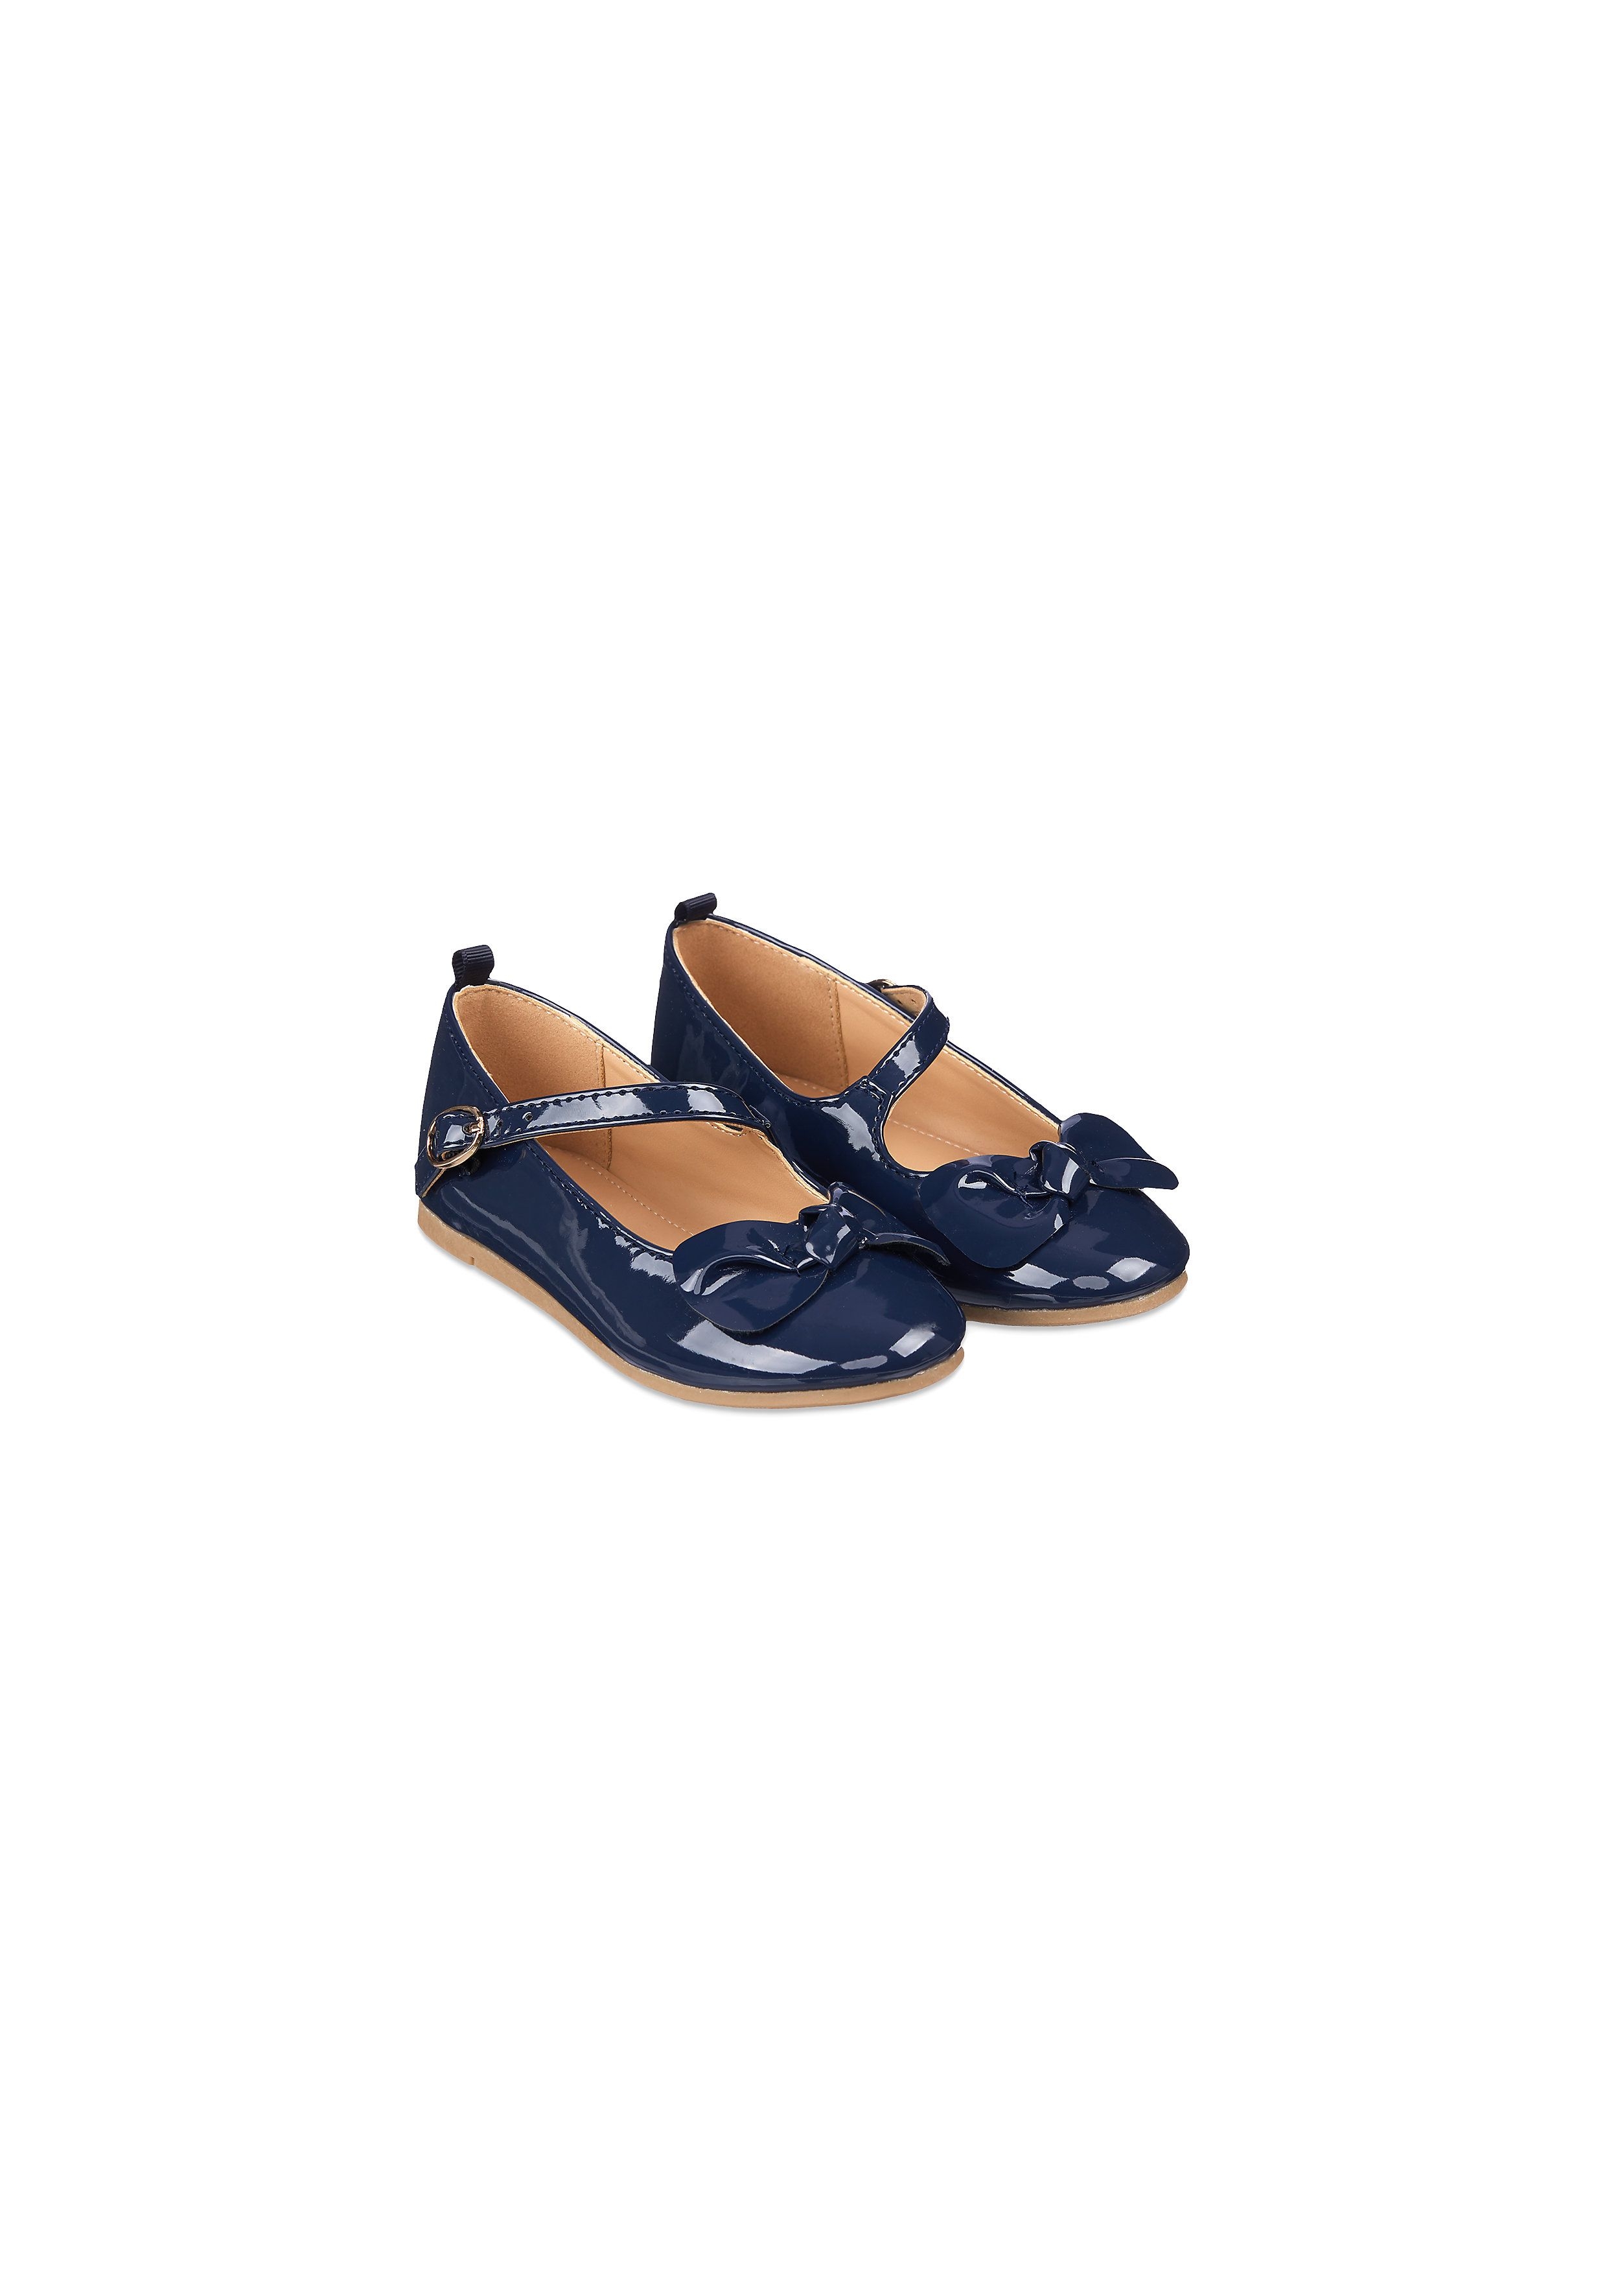 Mothercare | Girls Navy Patent Ballerina Shoes - Navy 0